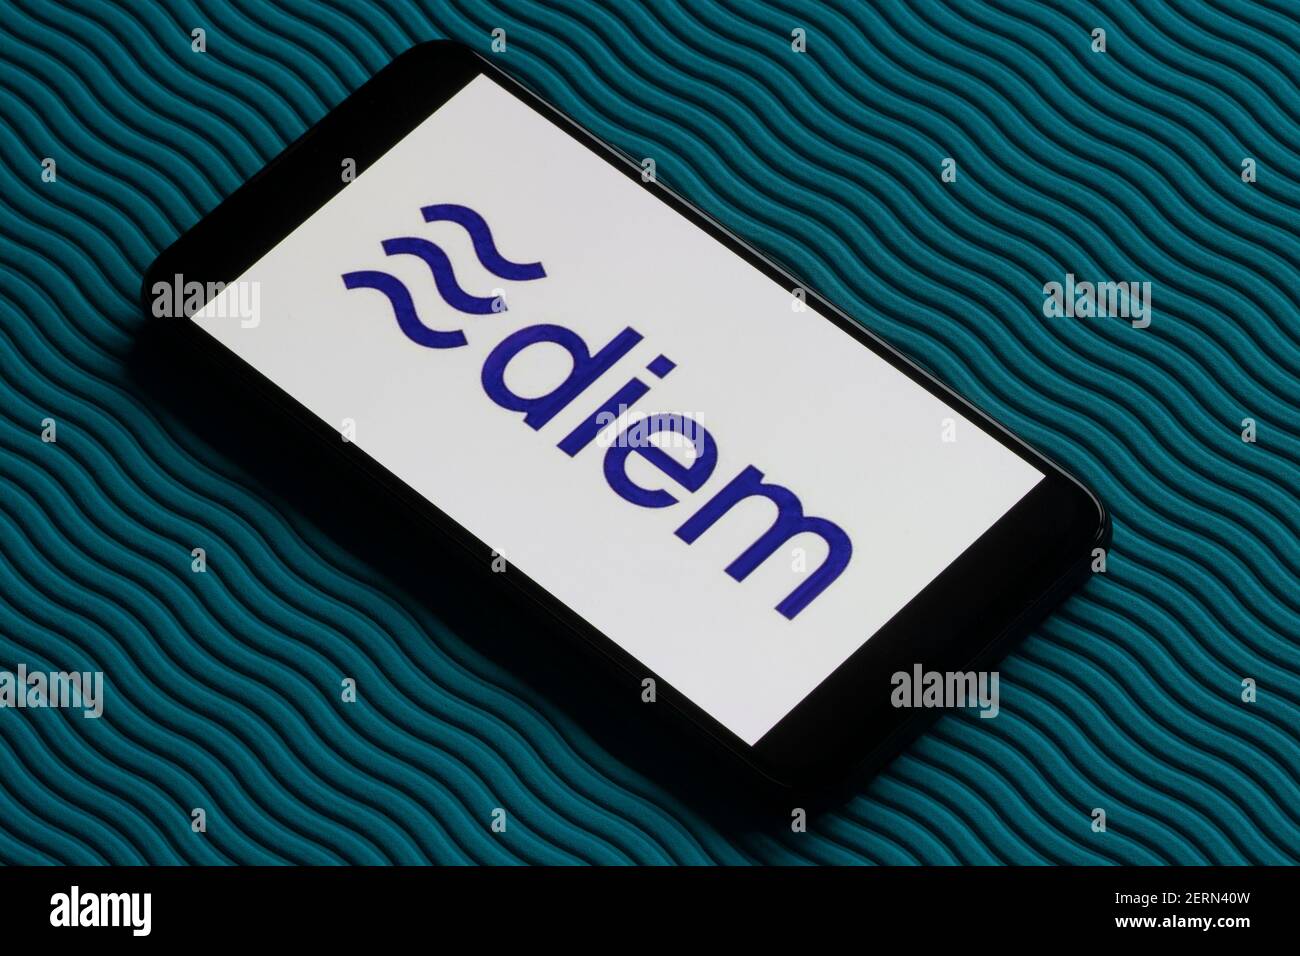 Formerly named Libra, the rebranded Diem is now awaiting regulatory approval. Diem is a blockchain-based payment system proposed by Facebook, Inc. Stock Photo